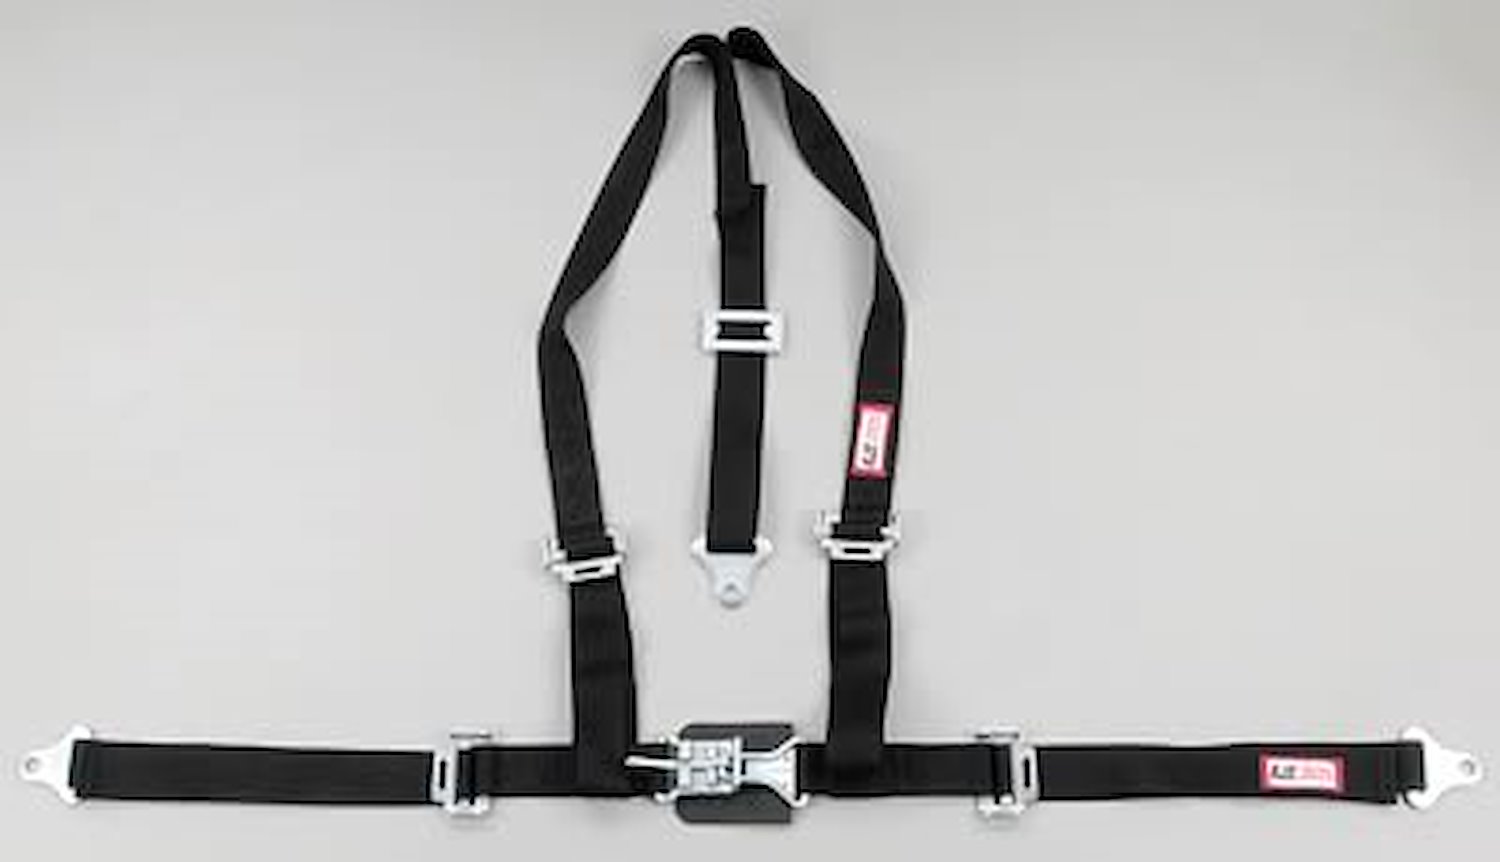 NON-SFI L&L HARNESS 3 PULL UP Lap Belt SEWN IN 2 Shoulder Harness V ROLL BAR Mount w/STERNUM STRAP ALL WRAP ENDS GRAY